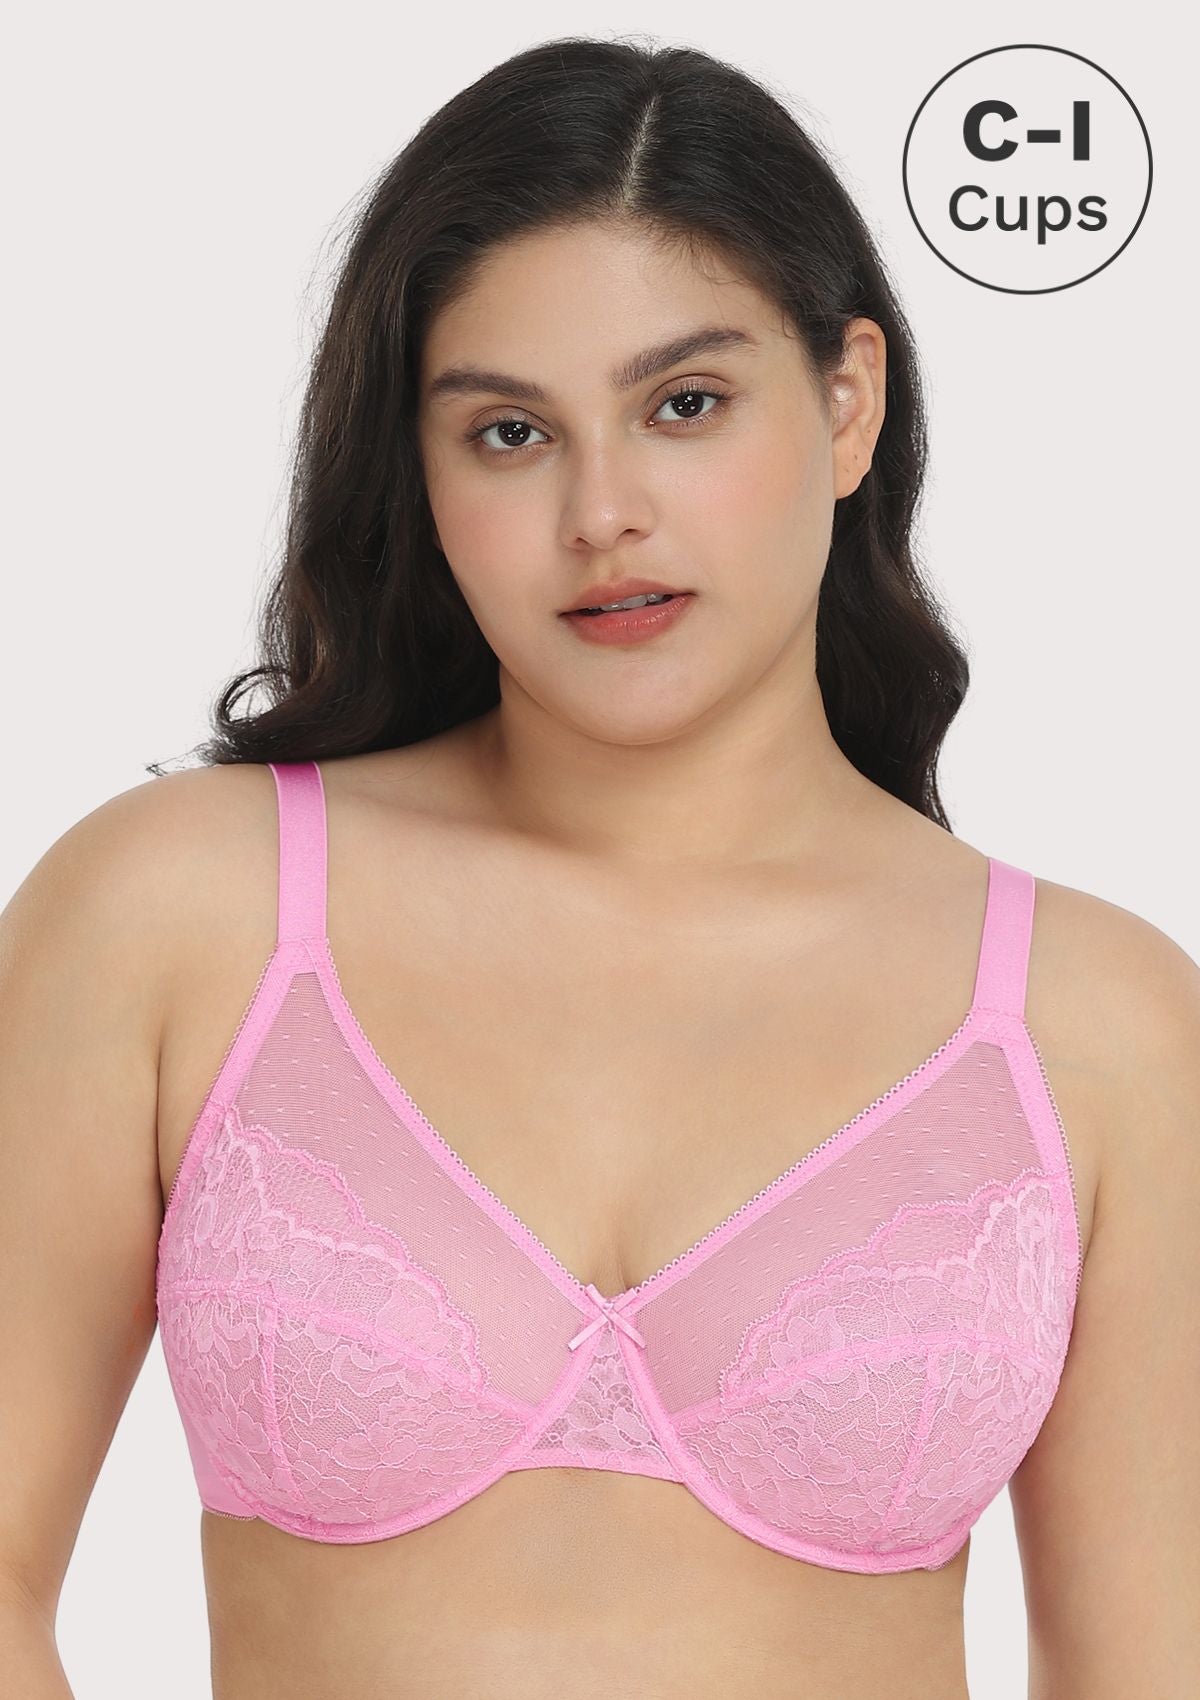 HSIA Enchante Lacy Bra: Comfy Sheer Lace Bra With Lift - Pink / 40 / G